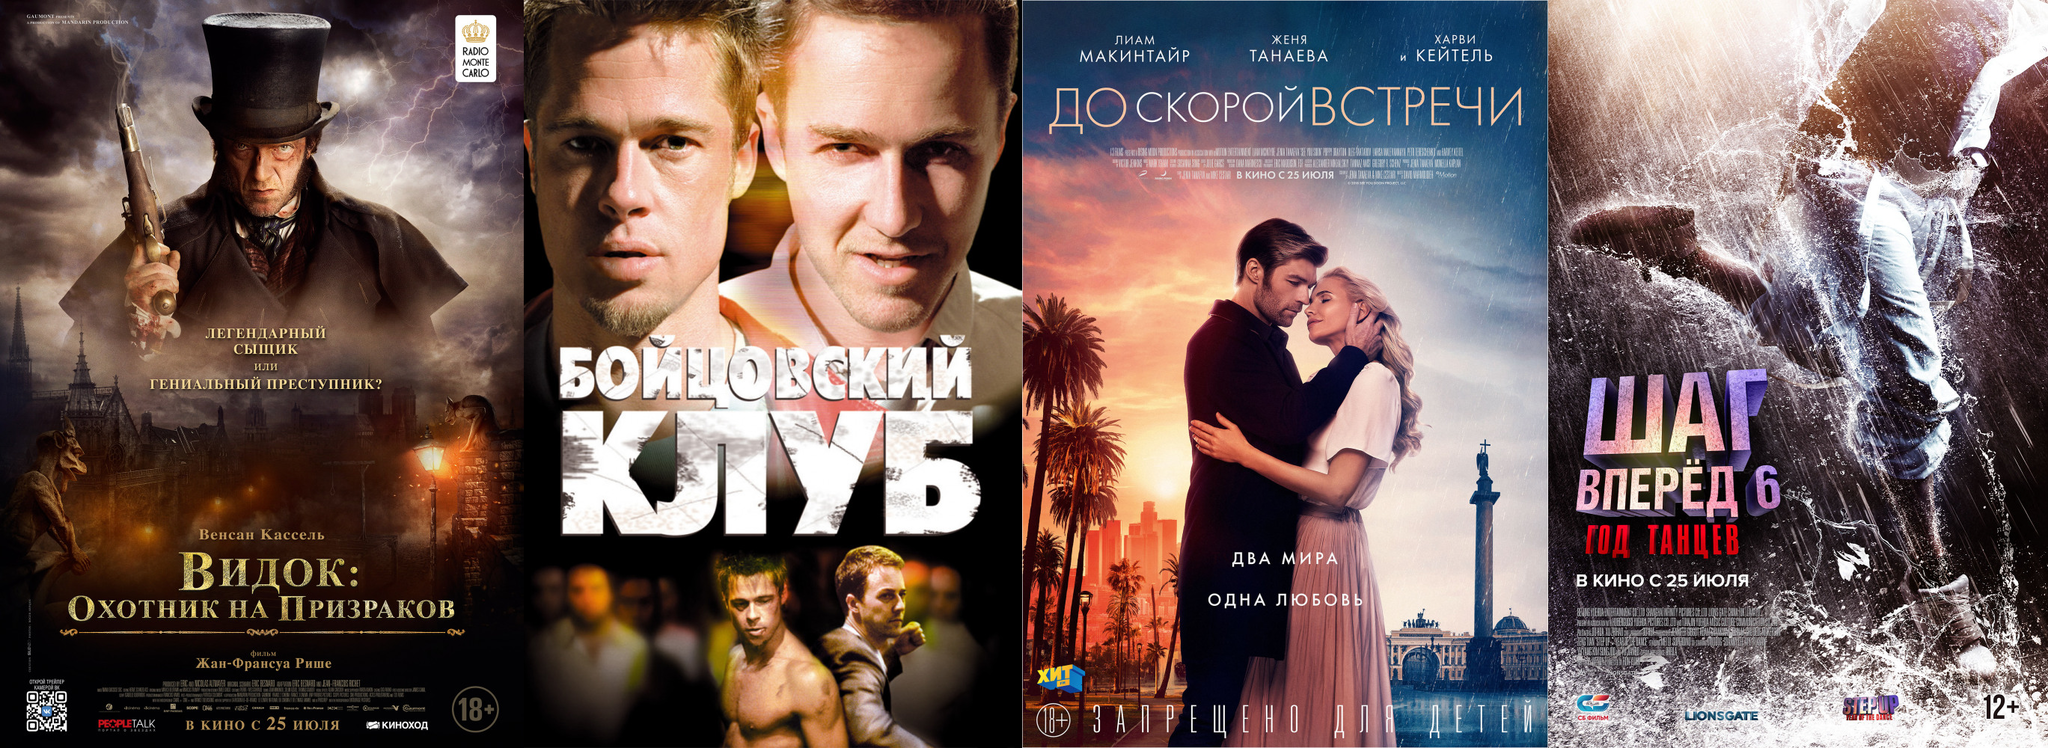 Russian box office receipts and distribution of screenings over the past weekend (July 25 - 28) - Movies, Box office fees, Film distribution, , Fight club, Fight Club (film)